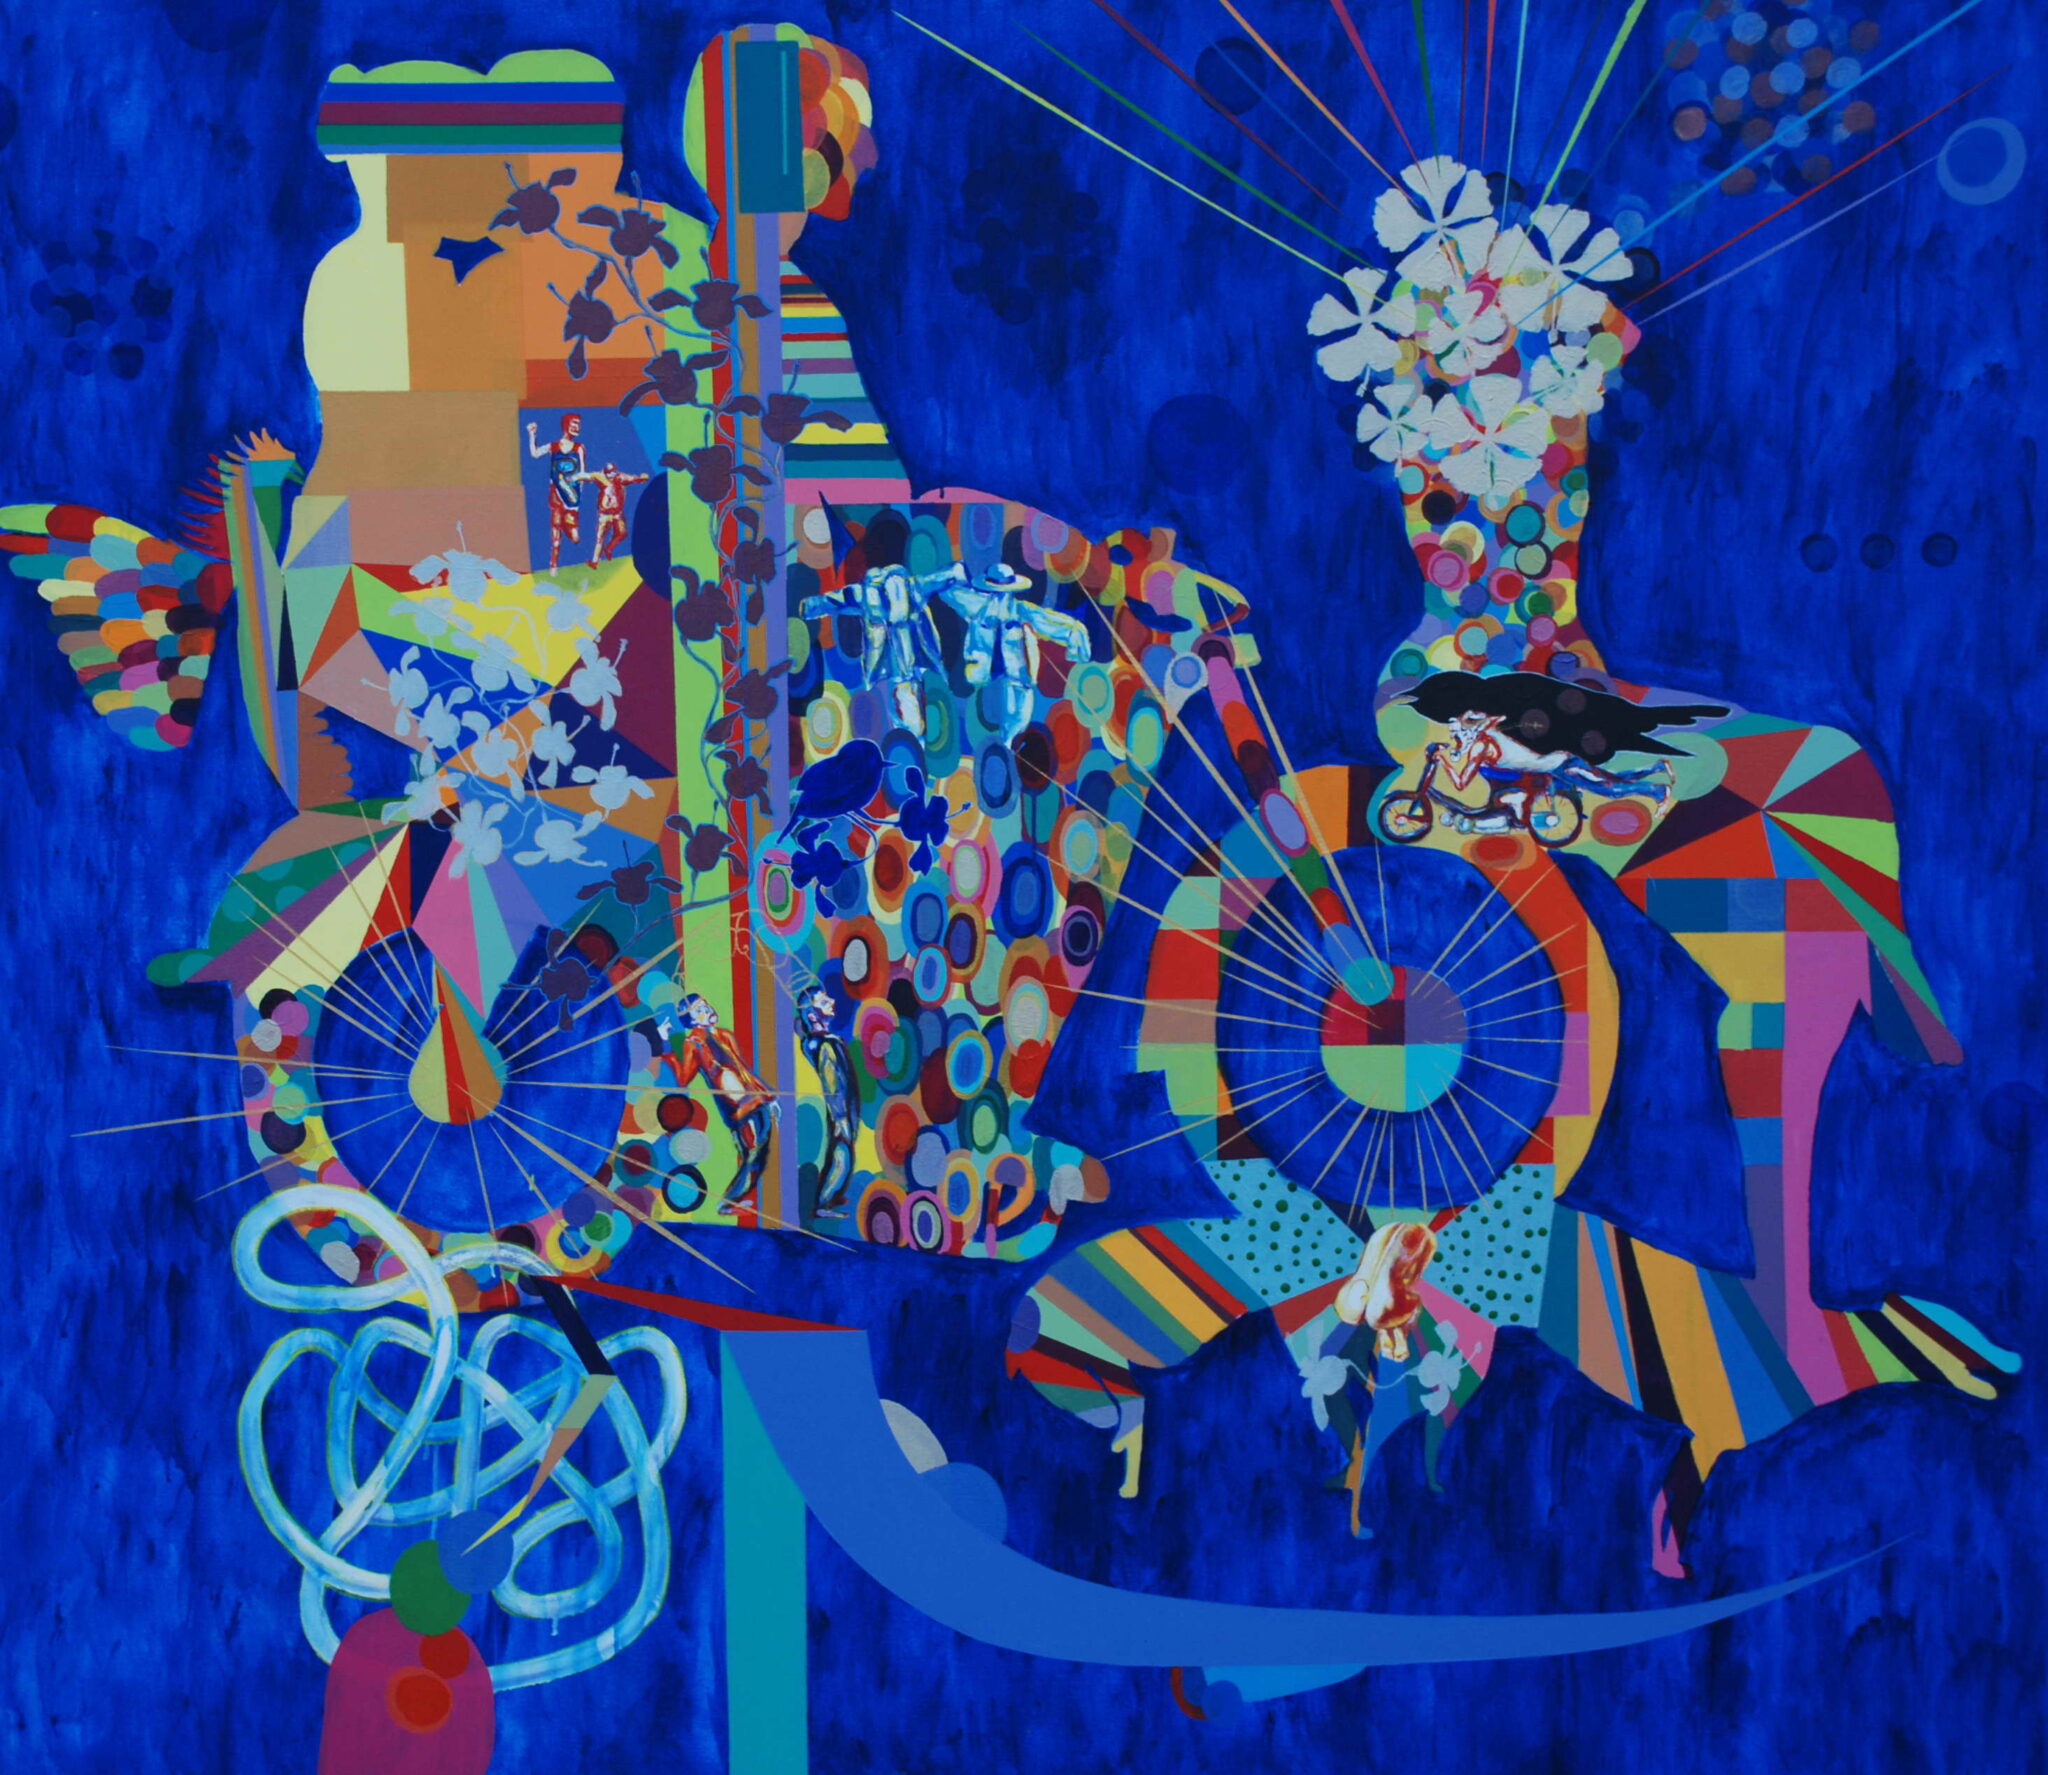 Vibrant blue art with colorful patches making up a central abstract figure  | Art by Hector Ledesma